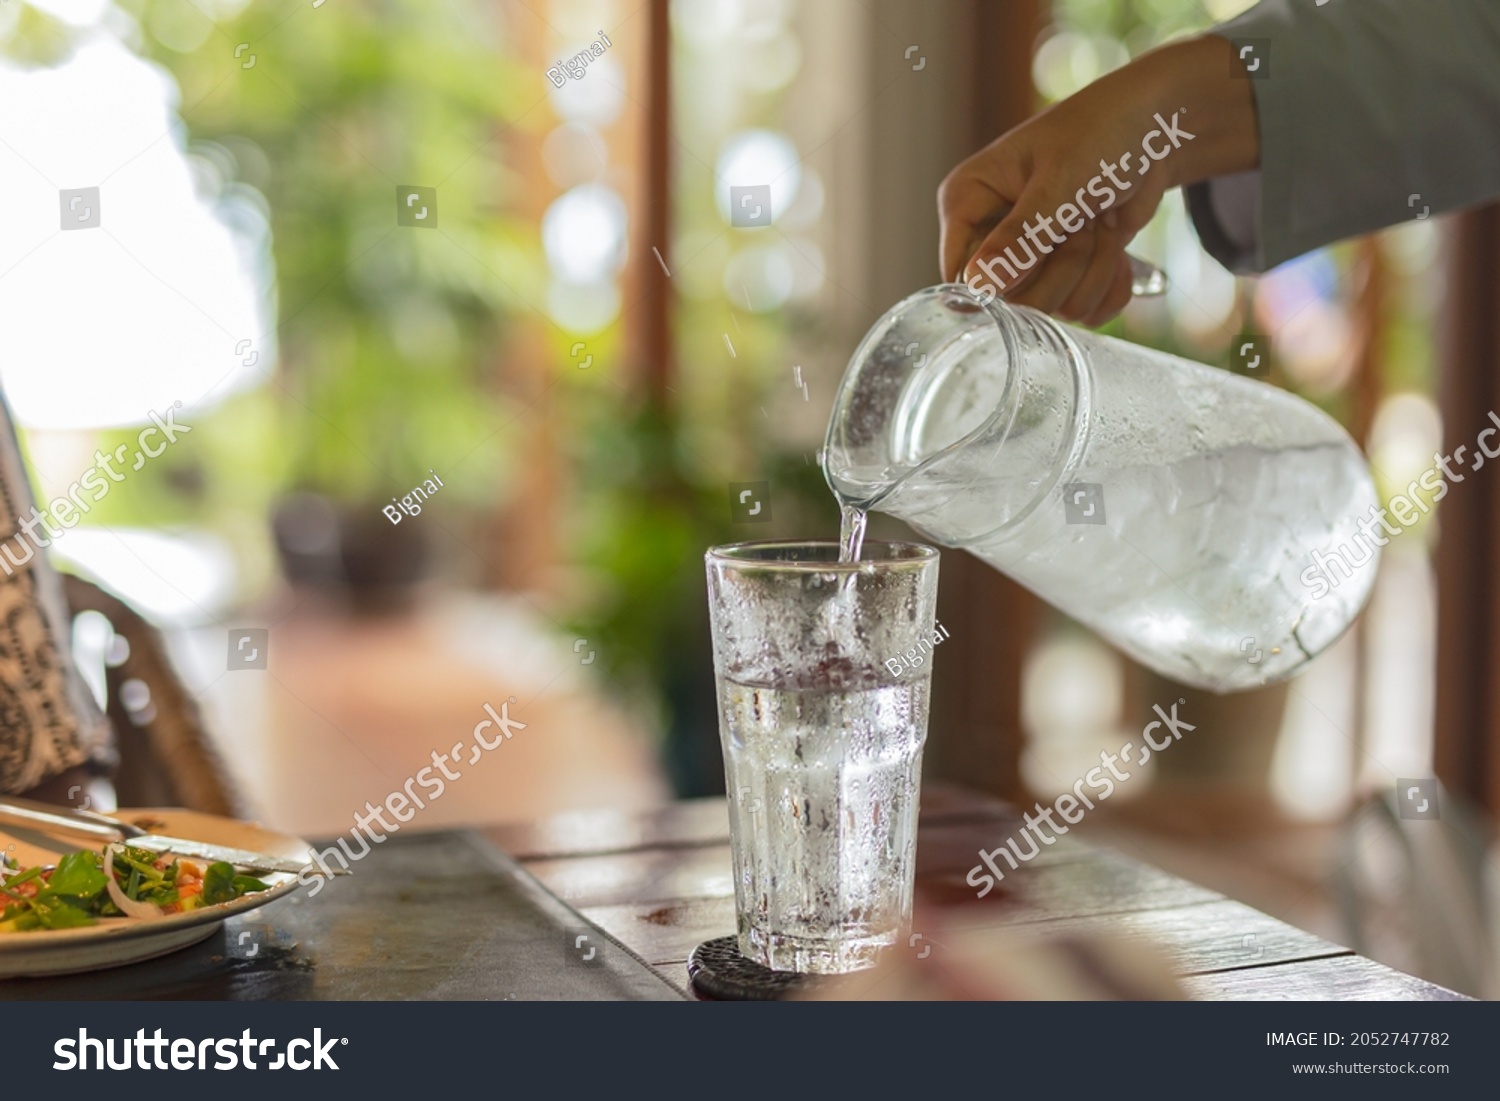 Waiter hand pouring water with ice into glasses on table #2052747782